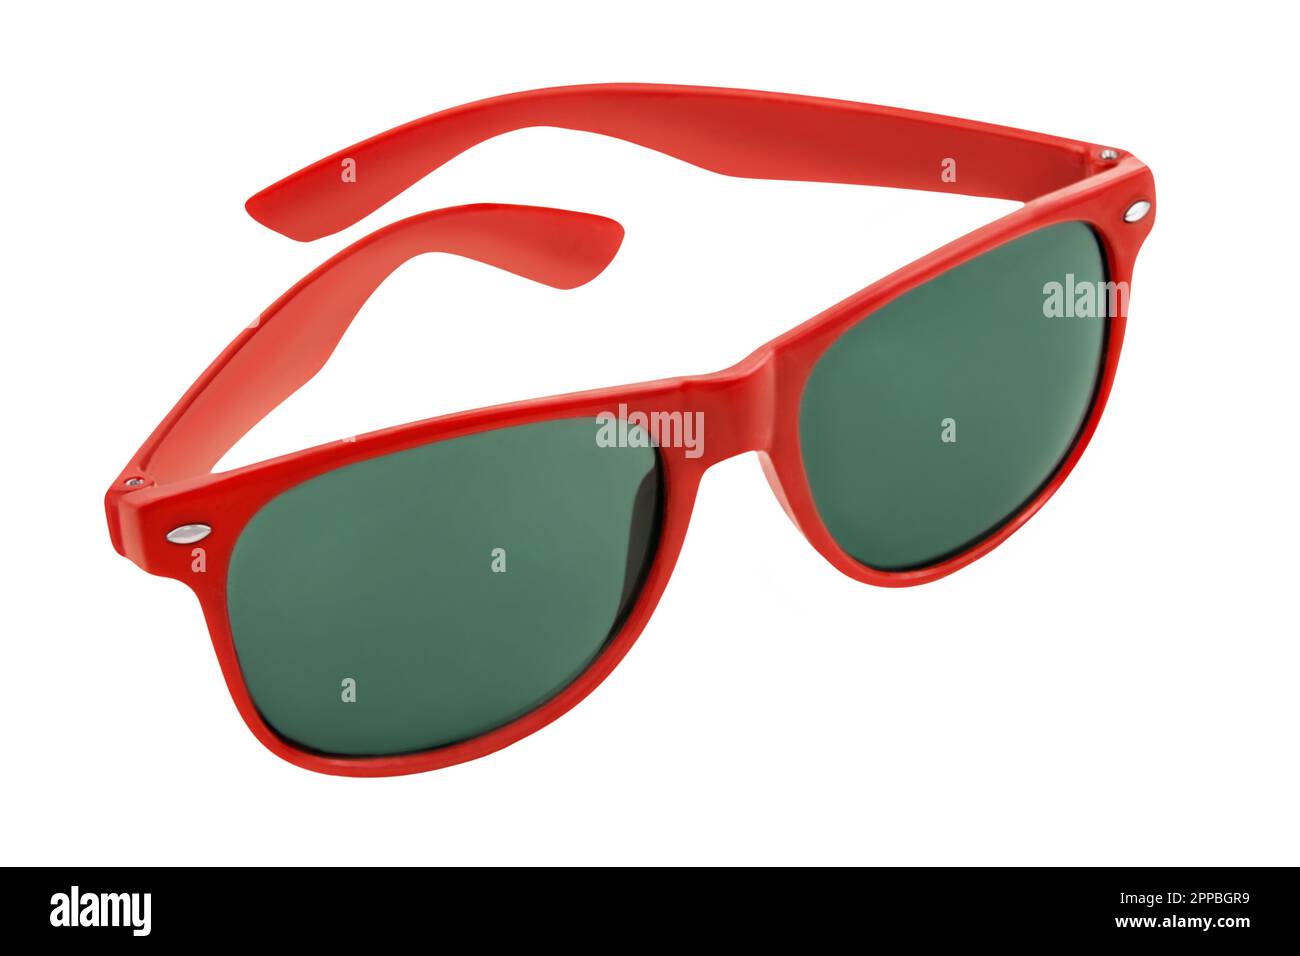 Red sunglasses isolated on white background Stock Photo